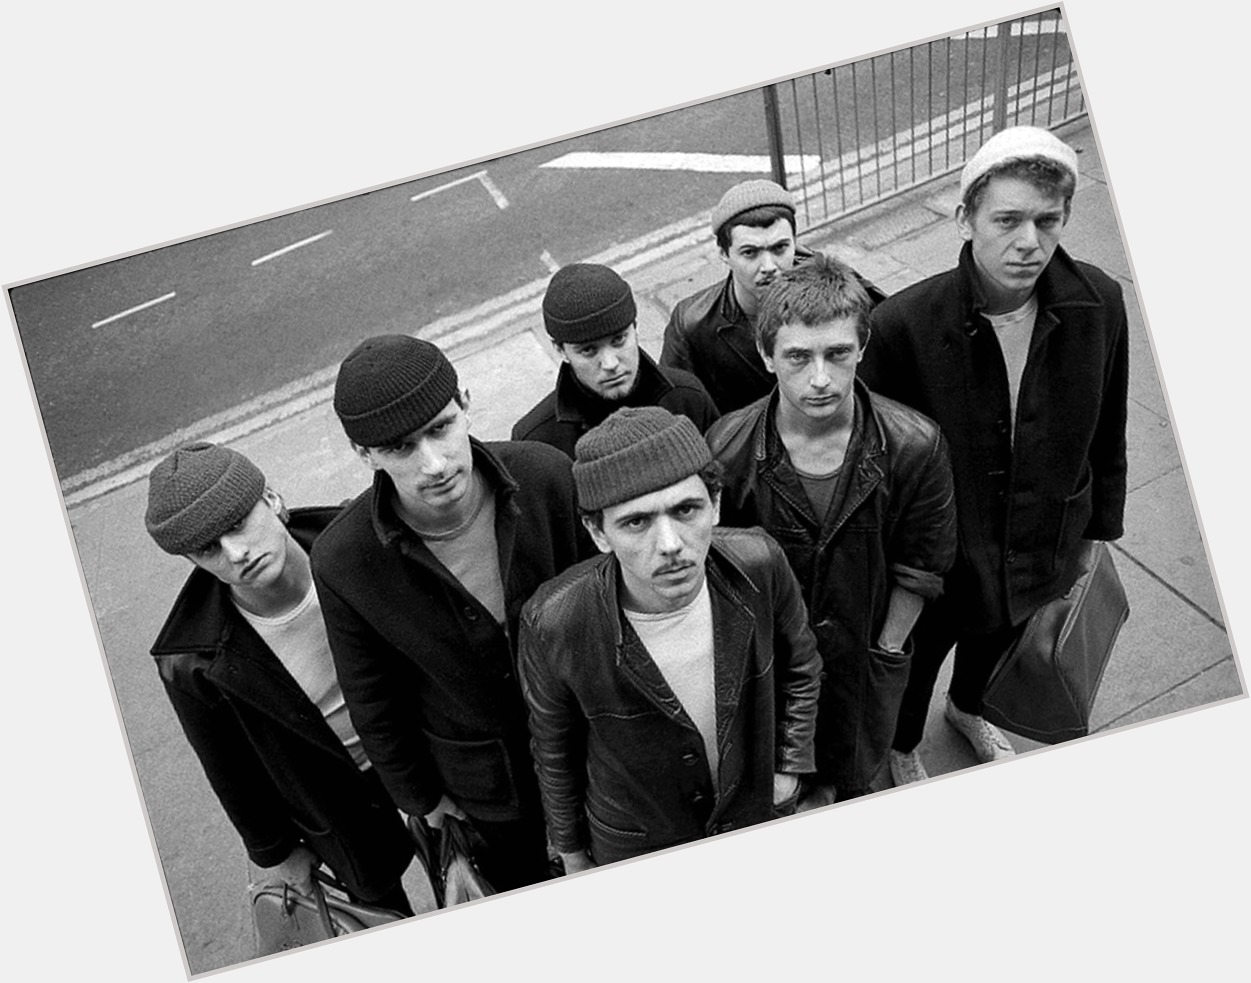 Dexys Midnight Runners exclusive hot pic 10.jpg